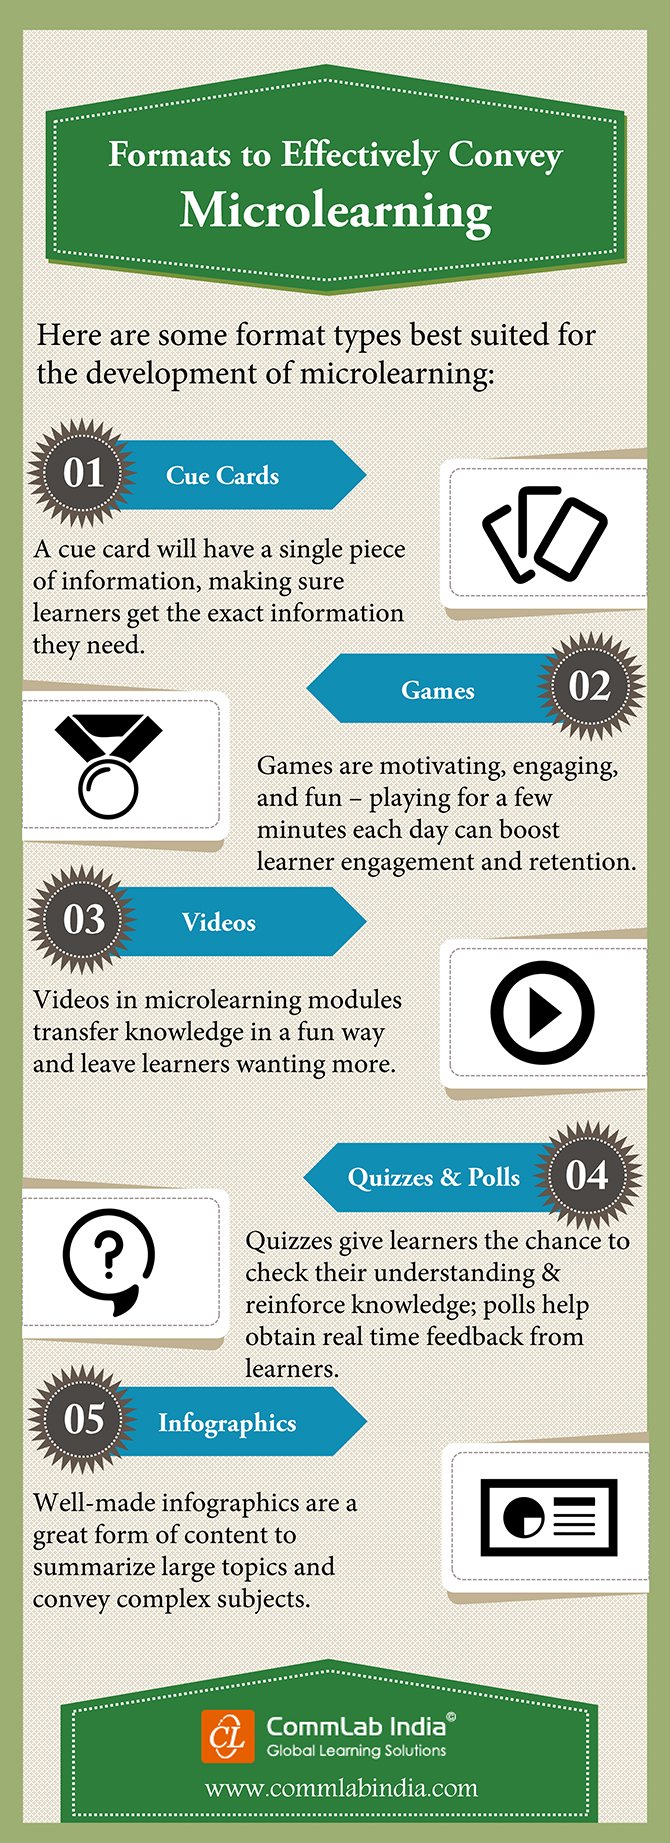 Formats to Effectively Convey Microlearning [Infographic]